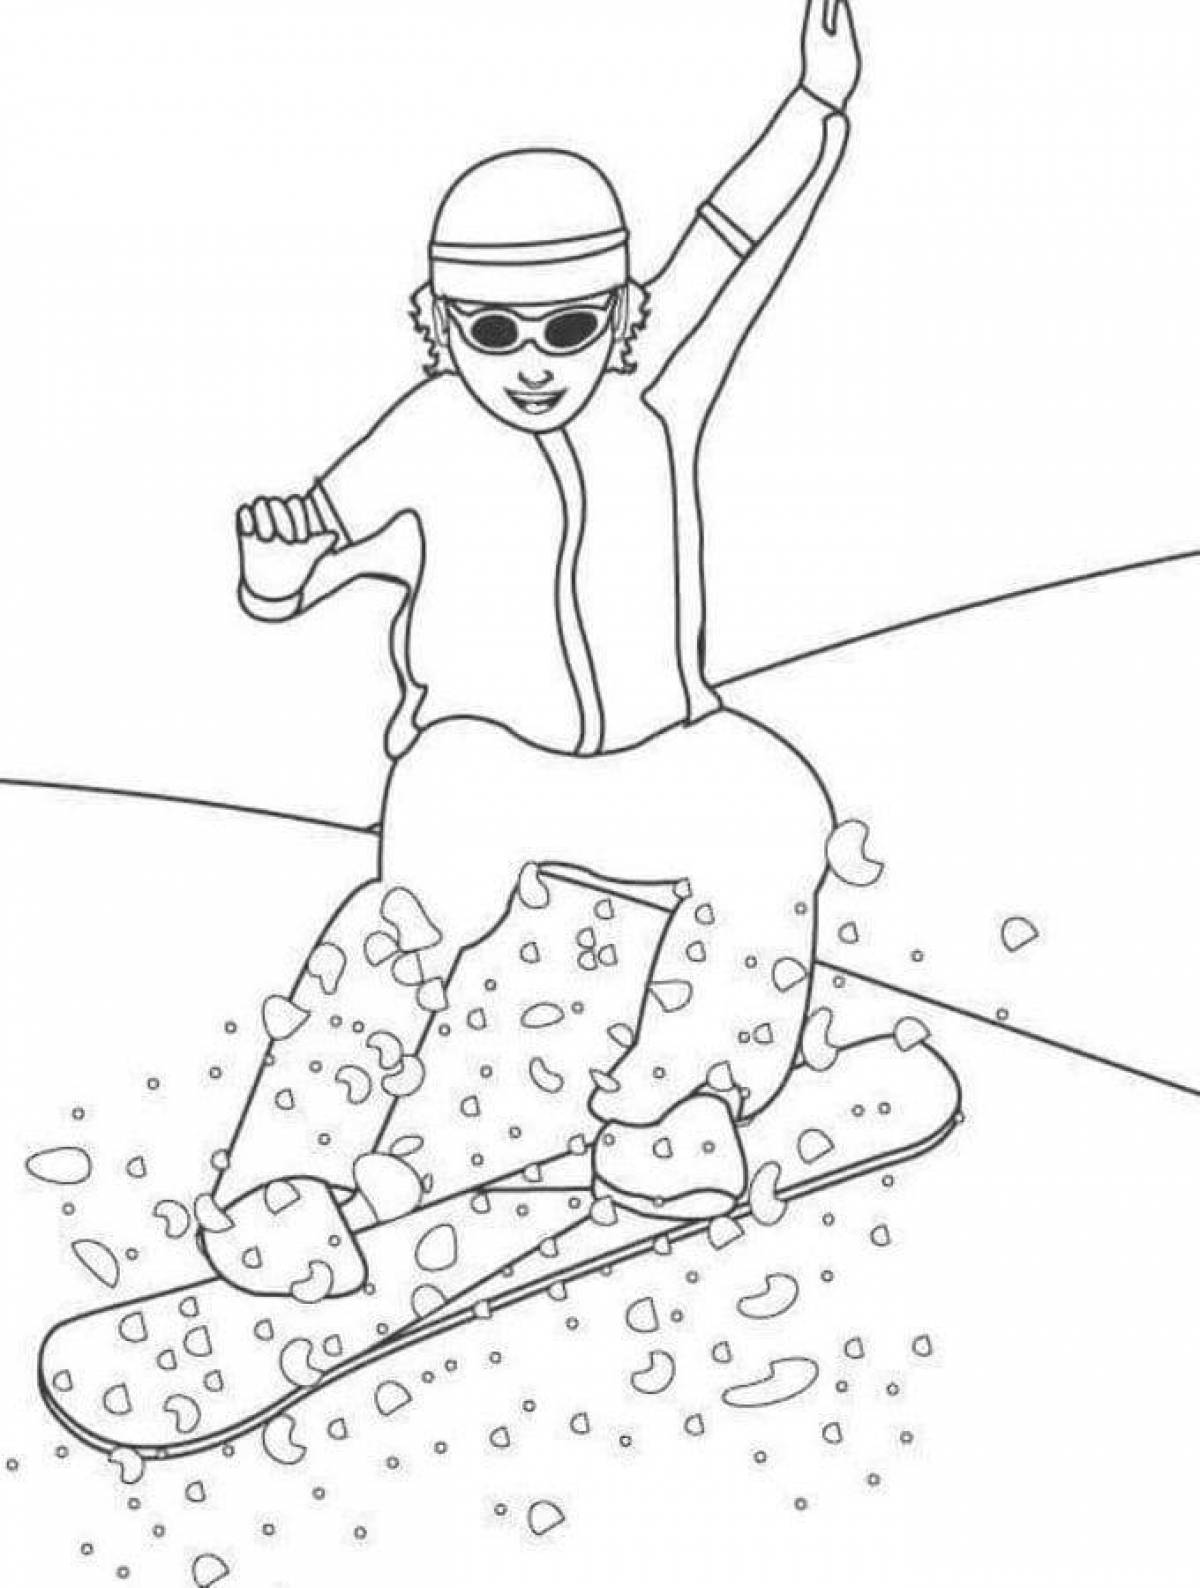 Fabulous winter sports coloring pages for 6-7 year olds